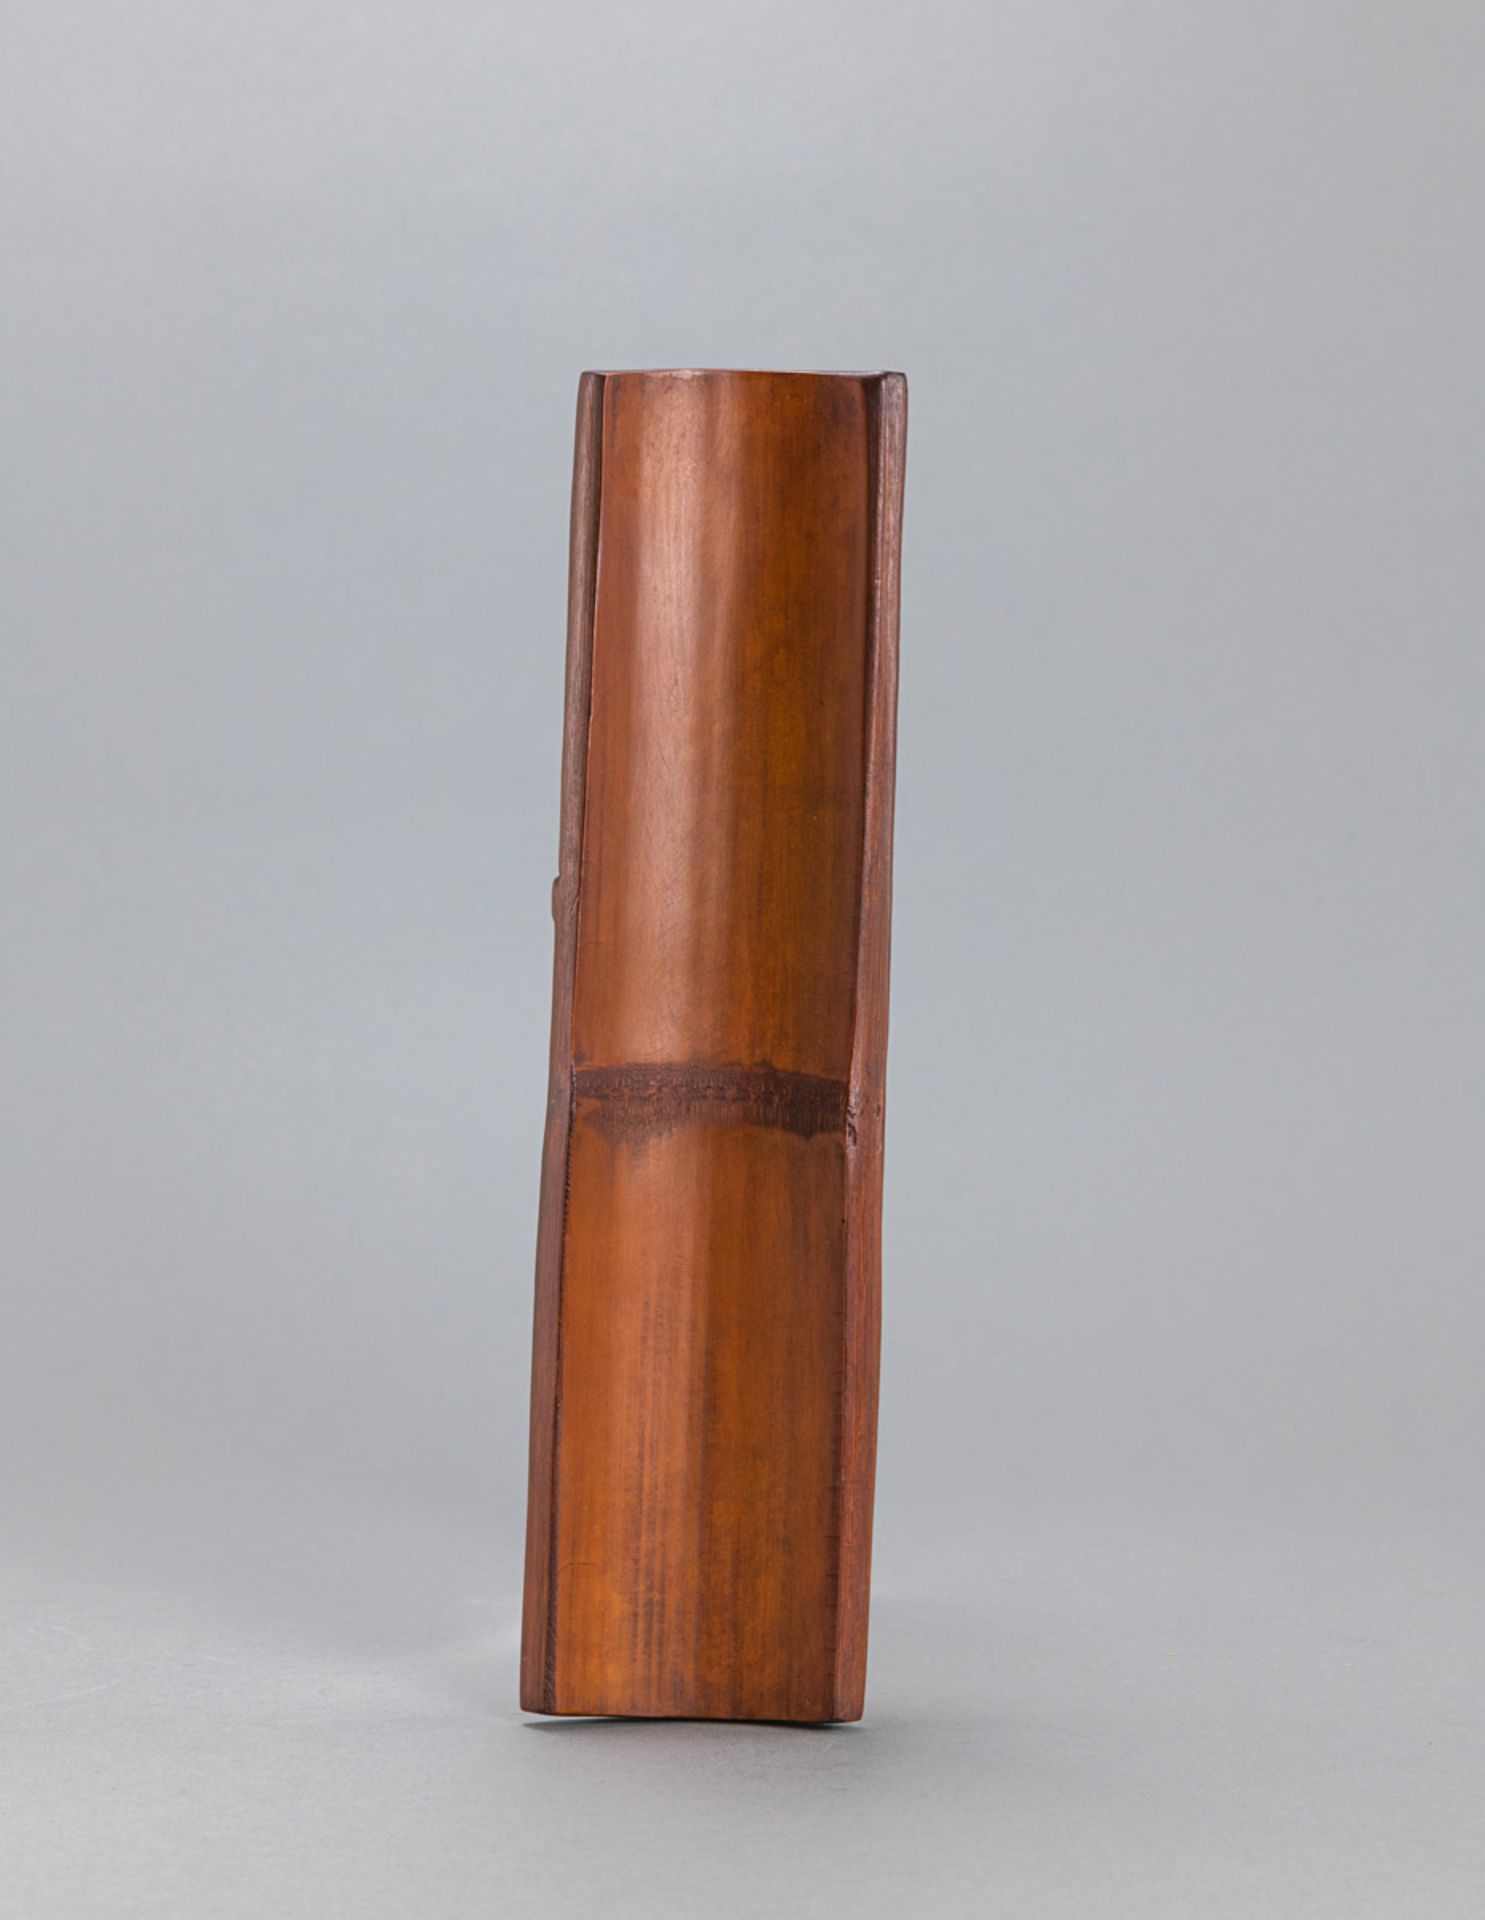 A LOTUS RELIEF BAMBOO ARMREST - Image 2 of 3